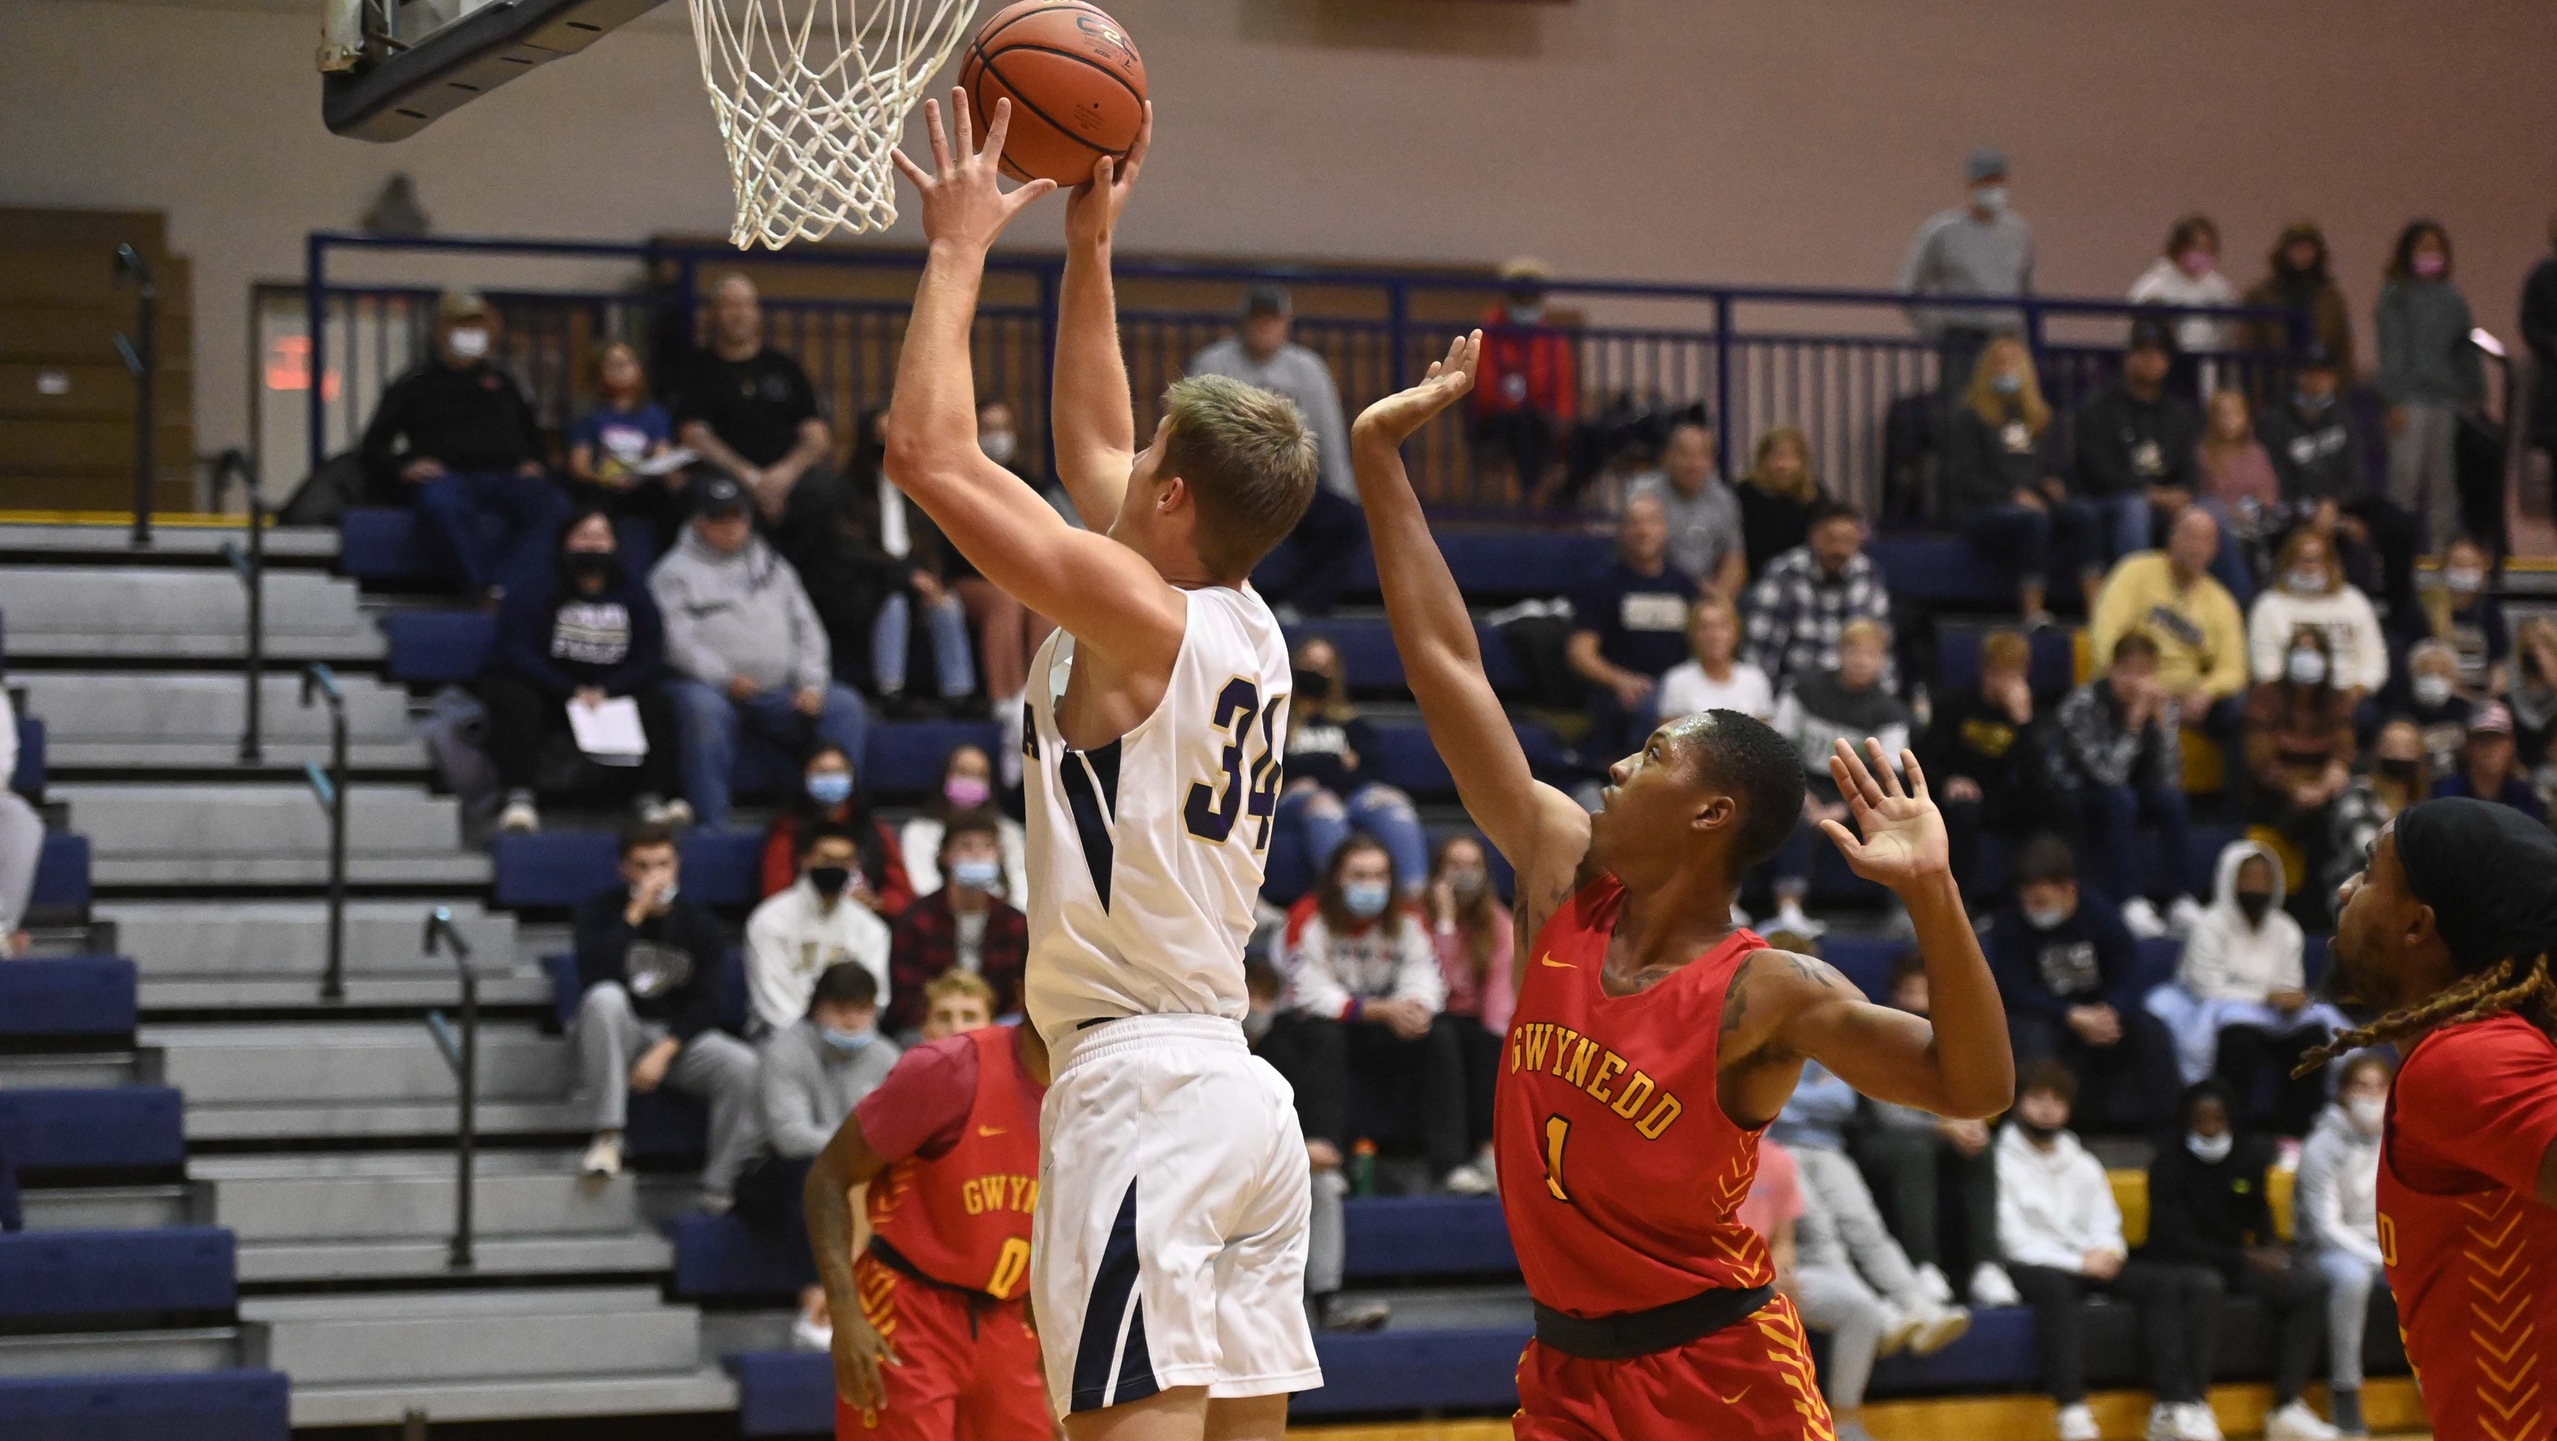 Men's Basketball Falls in Final Seconds At Catholic